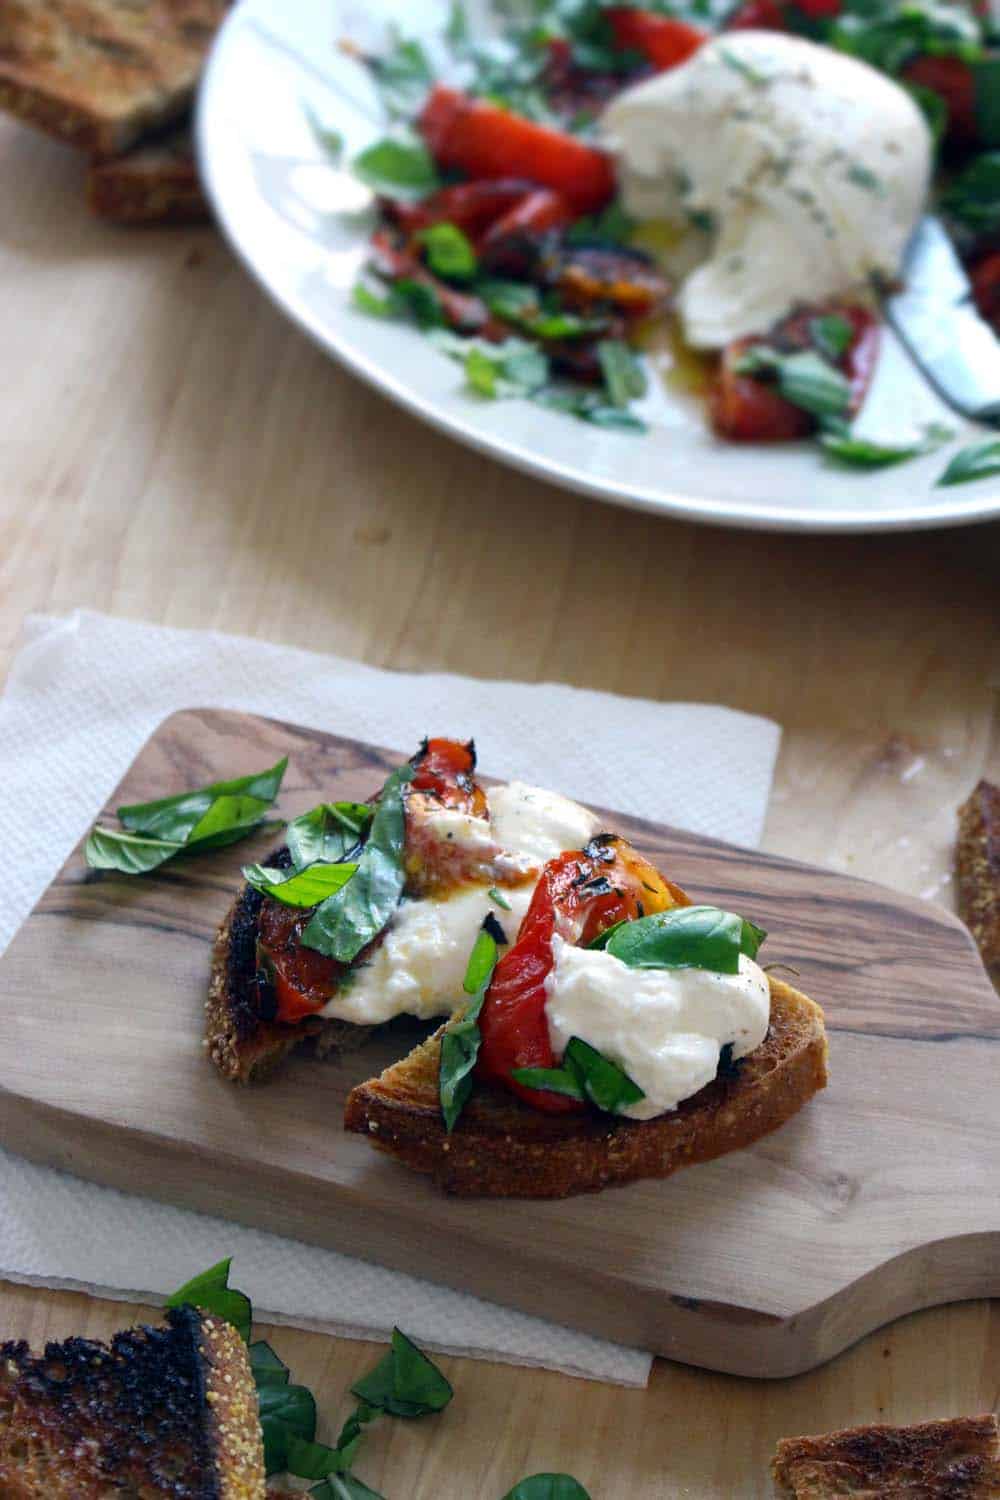 Small slice of toasted bread topped with burrata and roasted tomato, cut in half, on a wooden cutting board with a white plate holding recipe ingredients in the background.